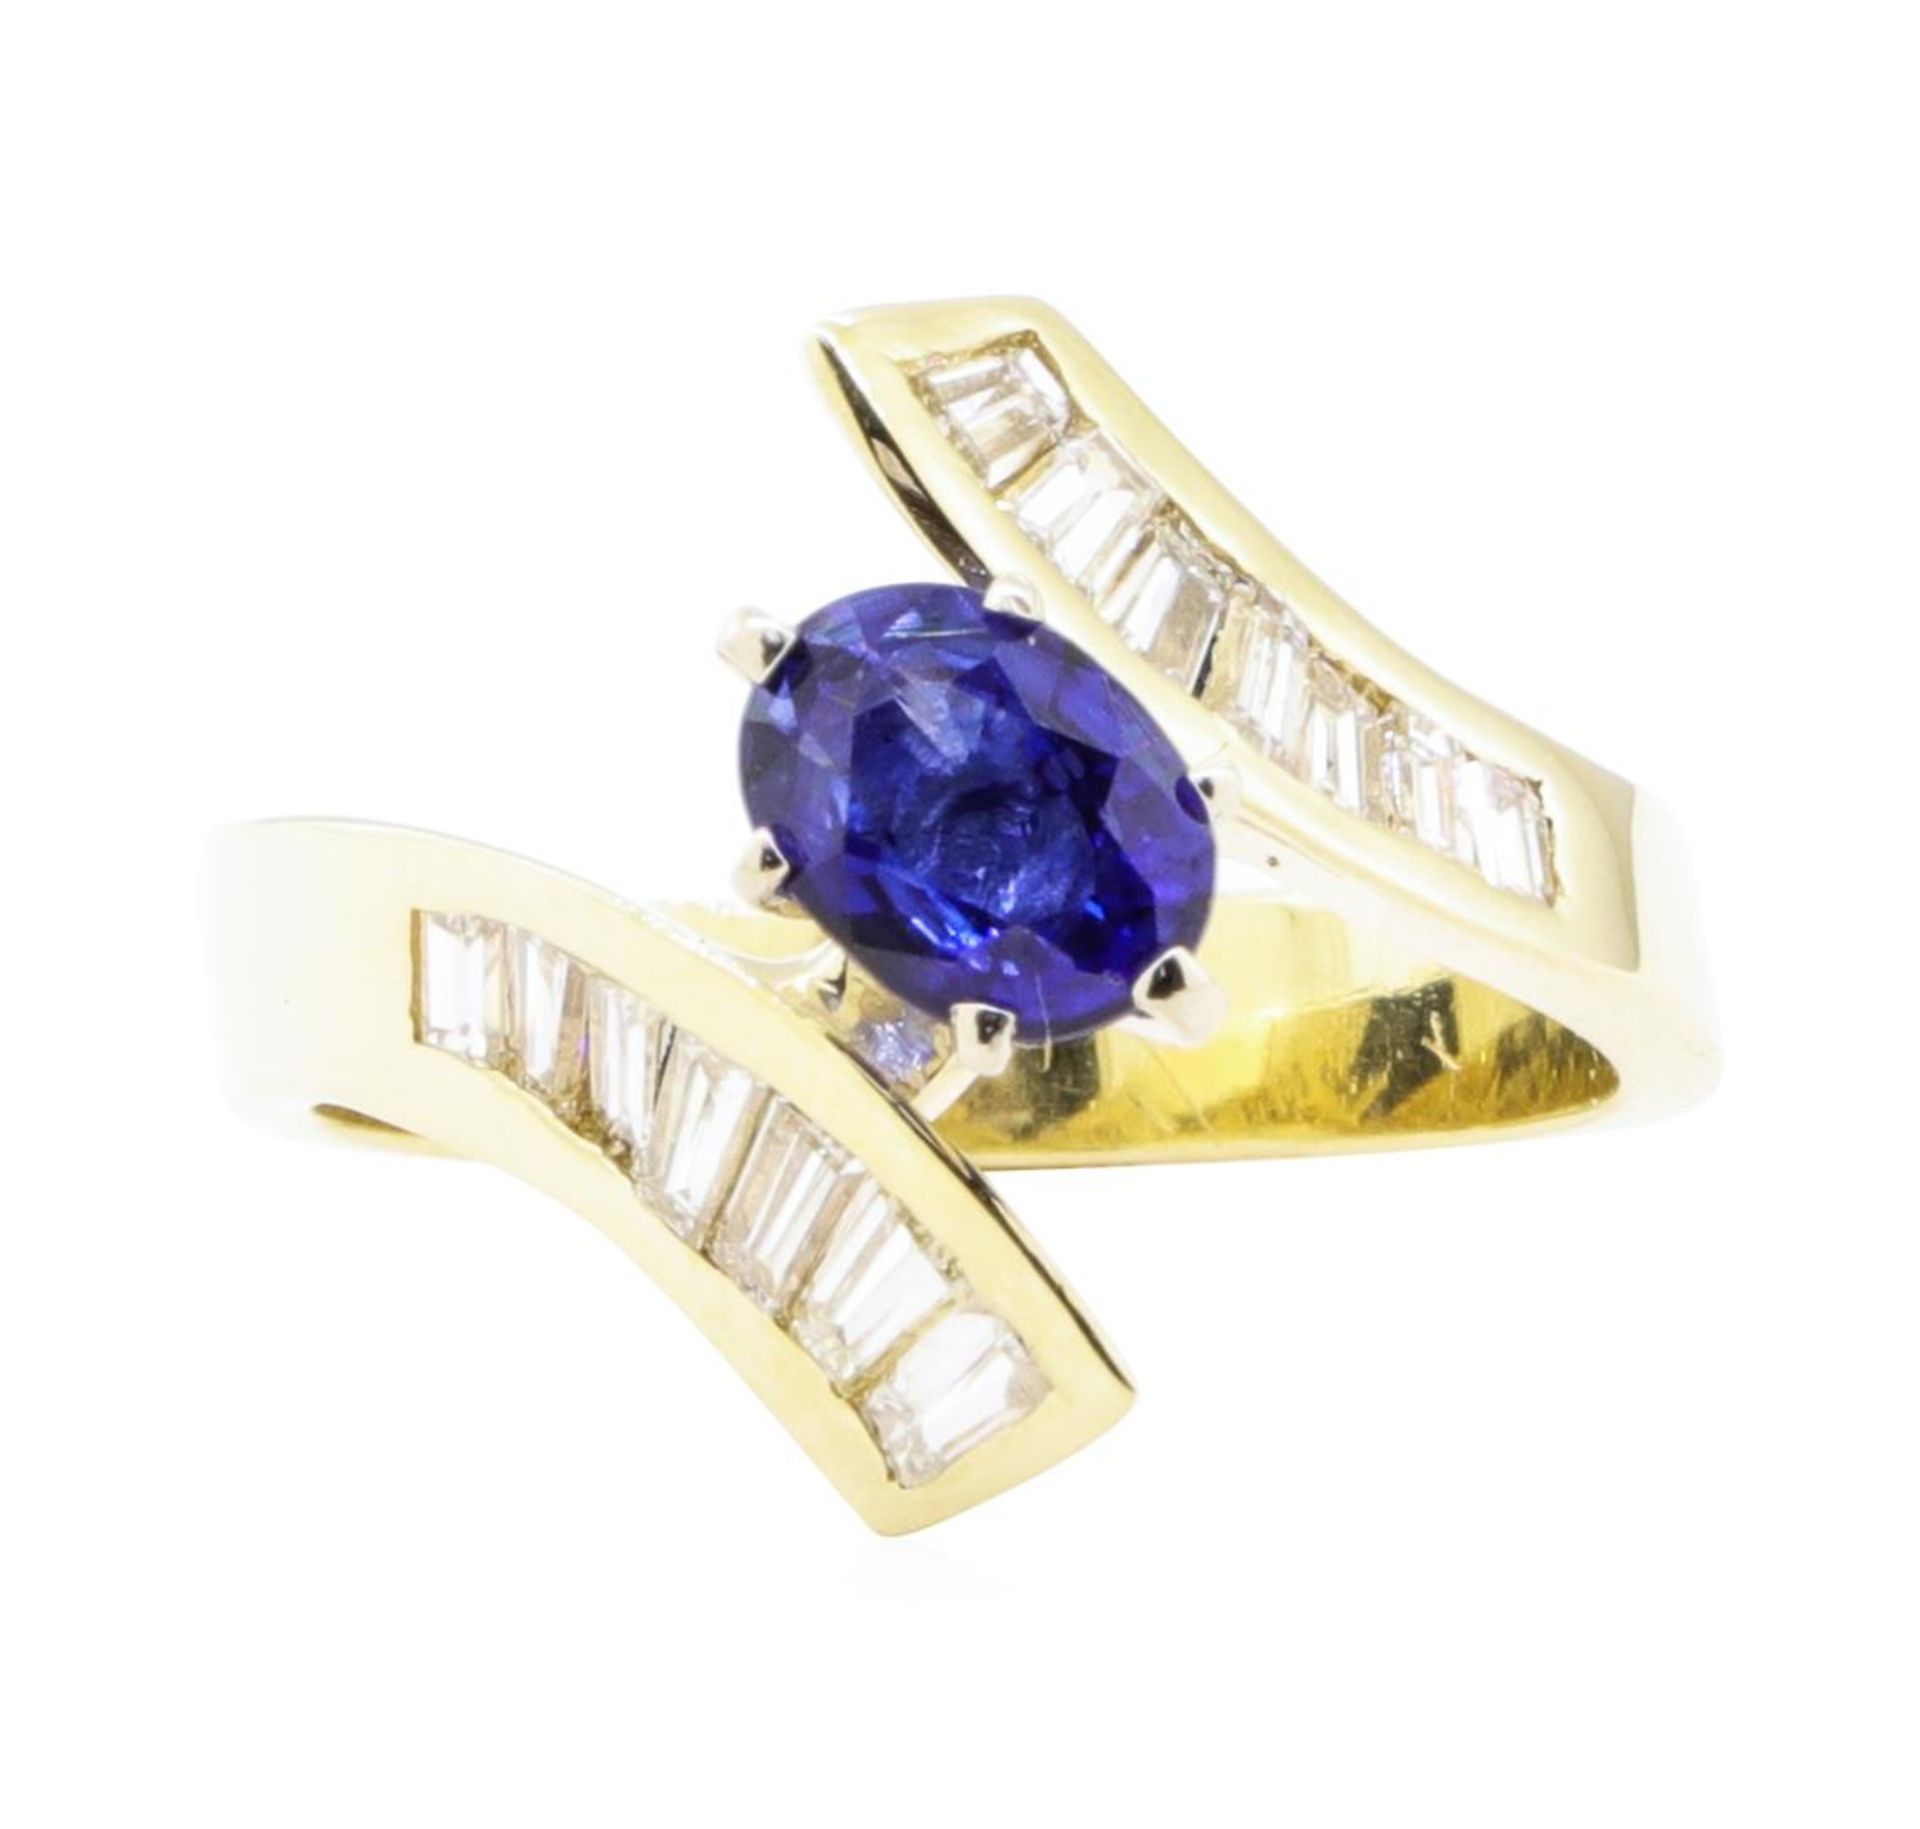 1.64 ctw Sapphire And Diamond Ring - 14KT Yellow Gold - Image 2 of 5